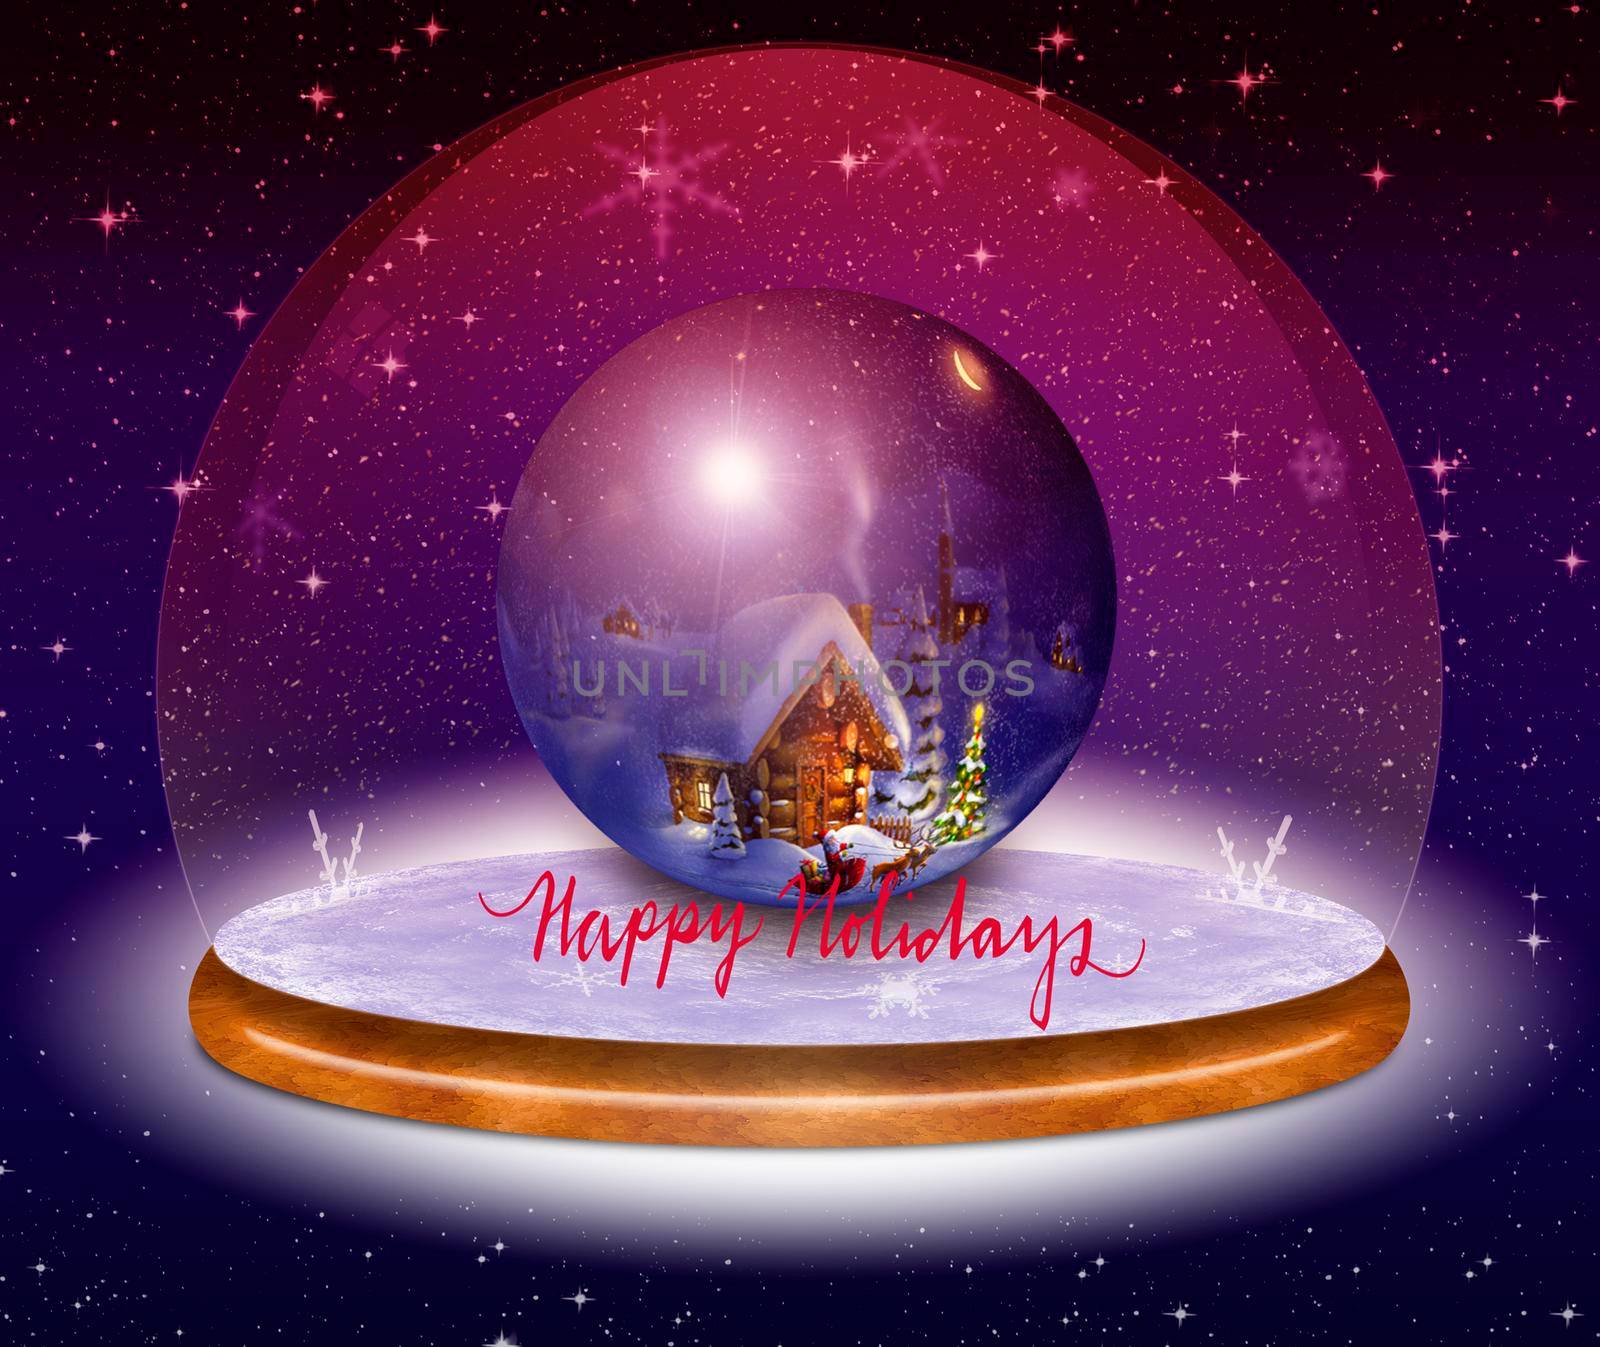 Christmas card : on a frosty background with snowflakes beautiful ball with Christmas symbols.